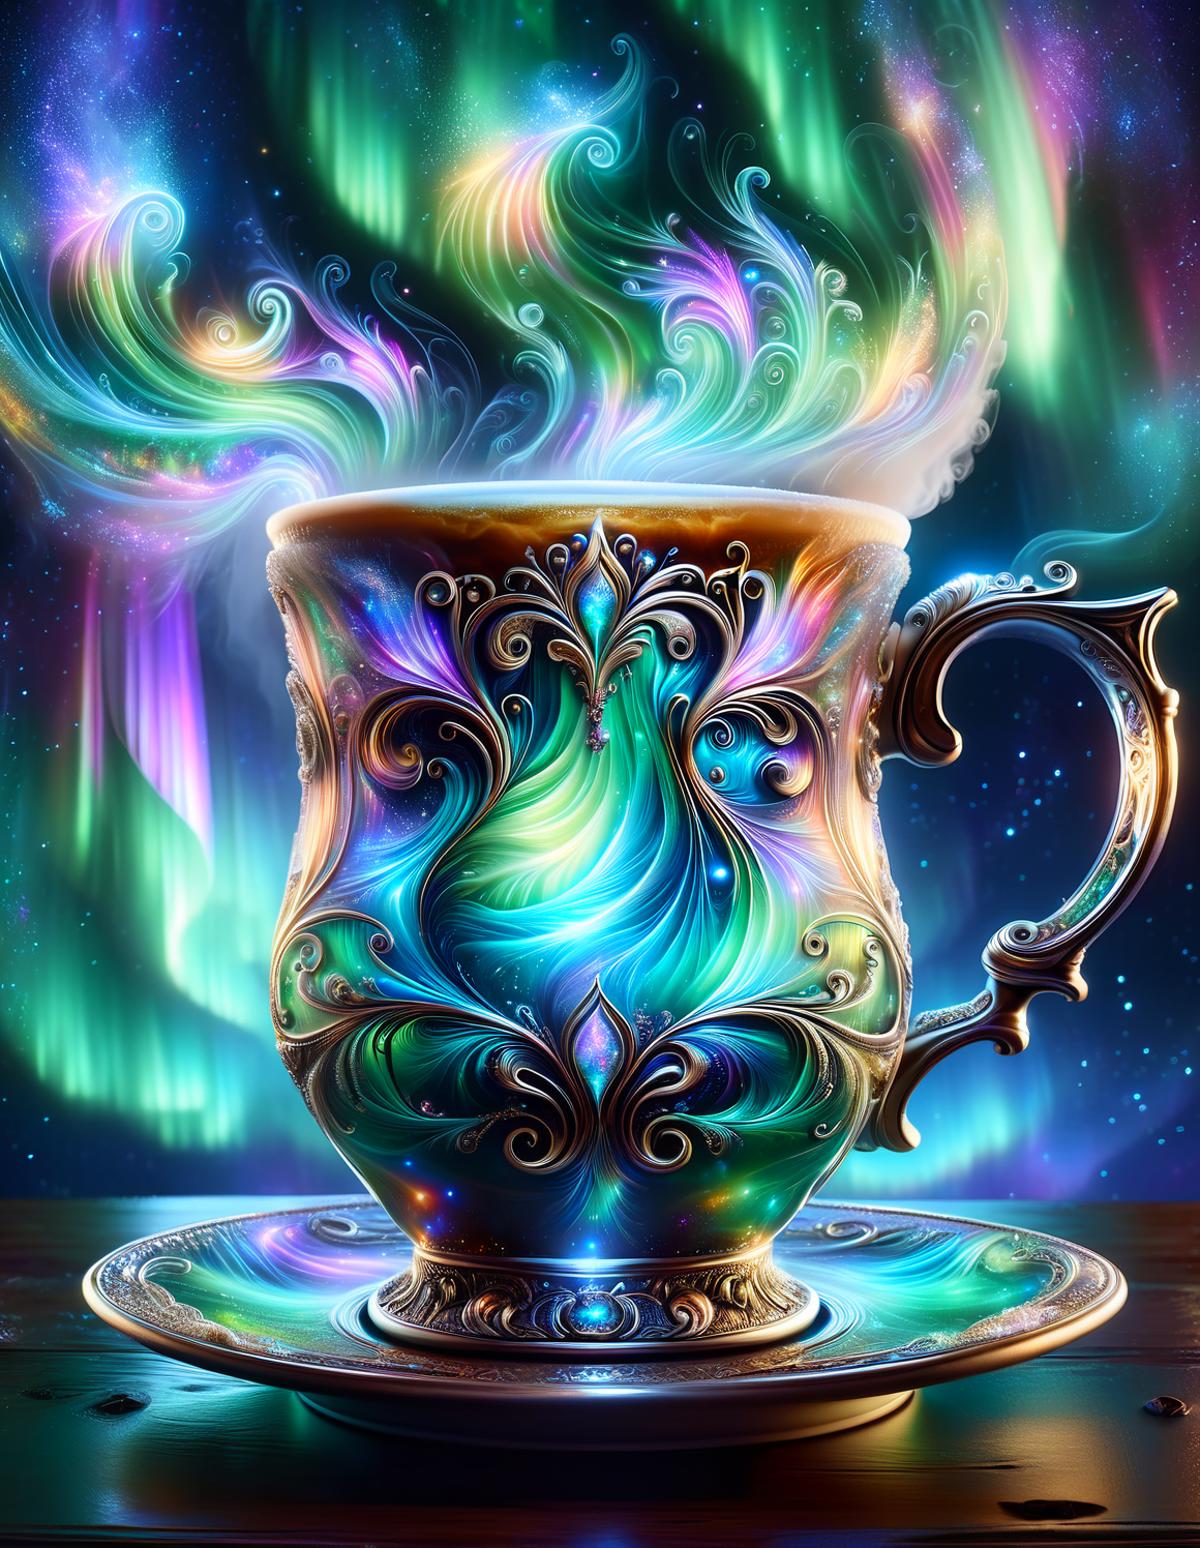 A colorful coffee mug on a saucer with a colorful background.